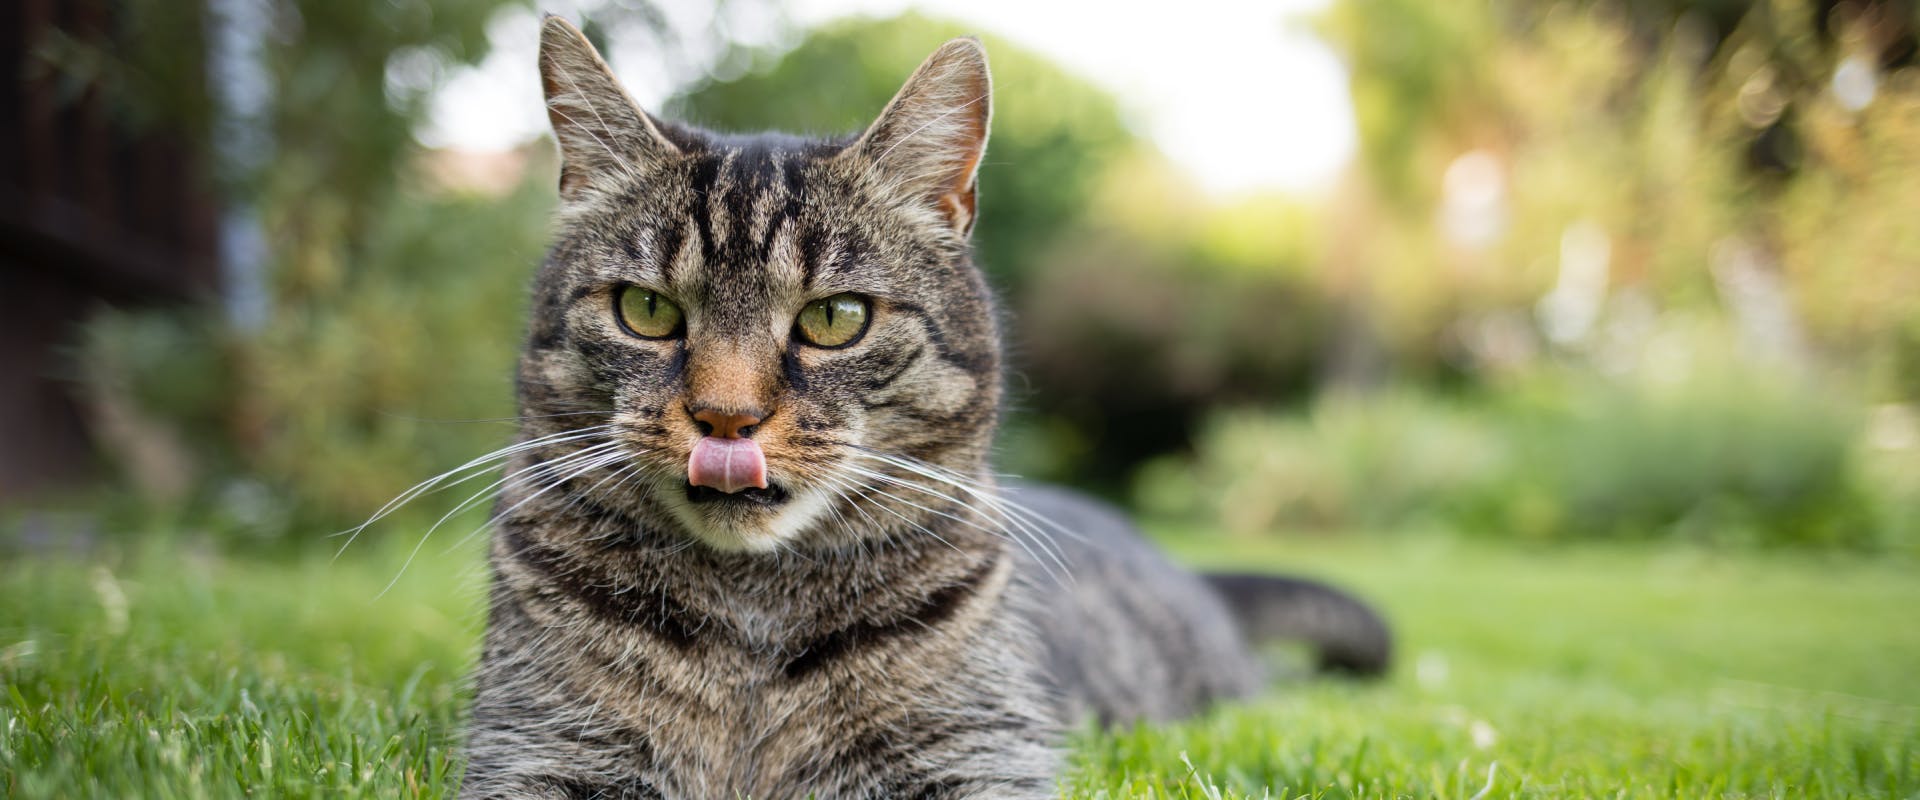 a tabby cat lying on a grass lawn in a garden and licking its top lip